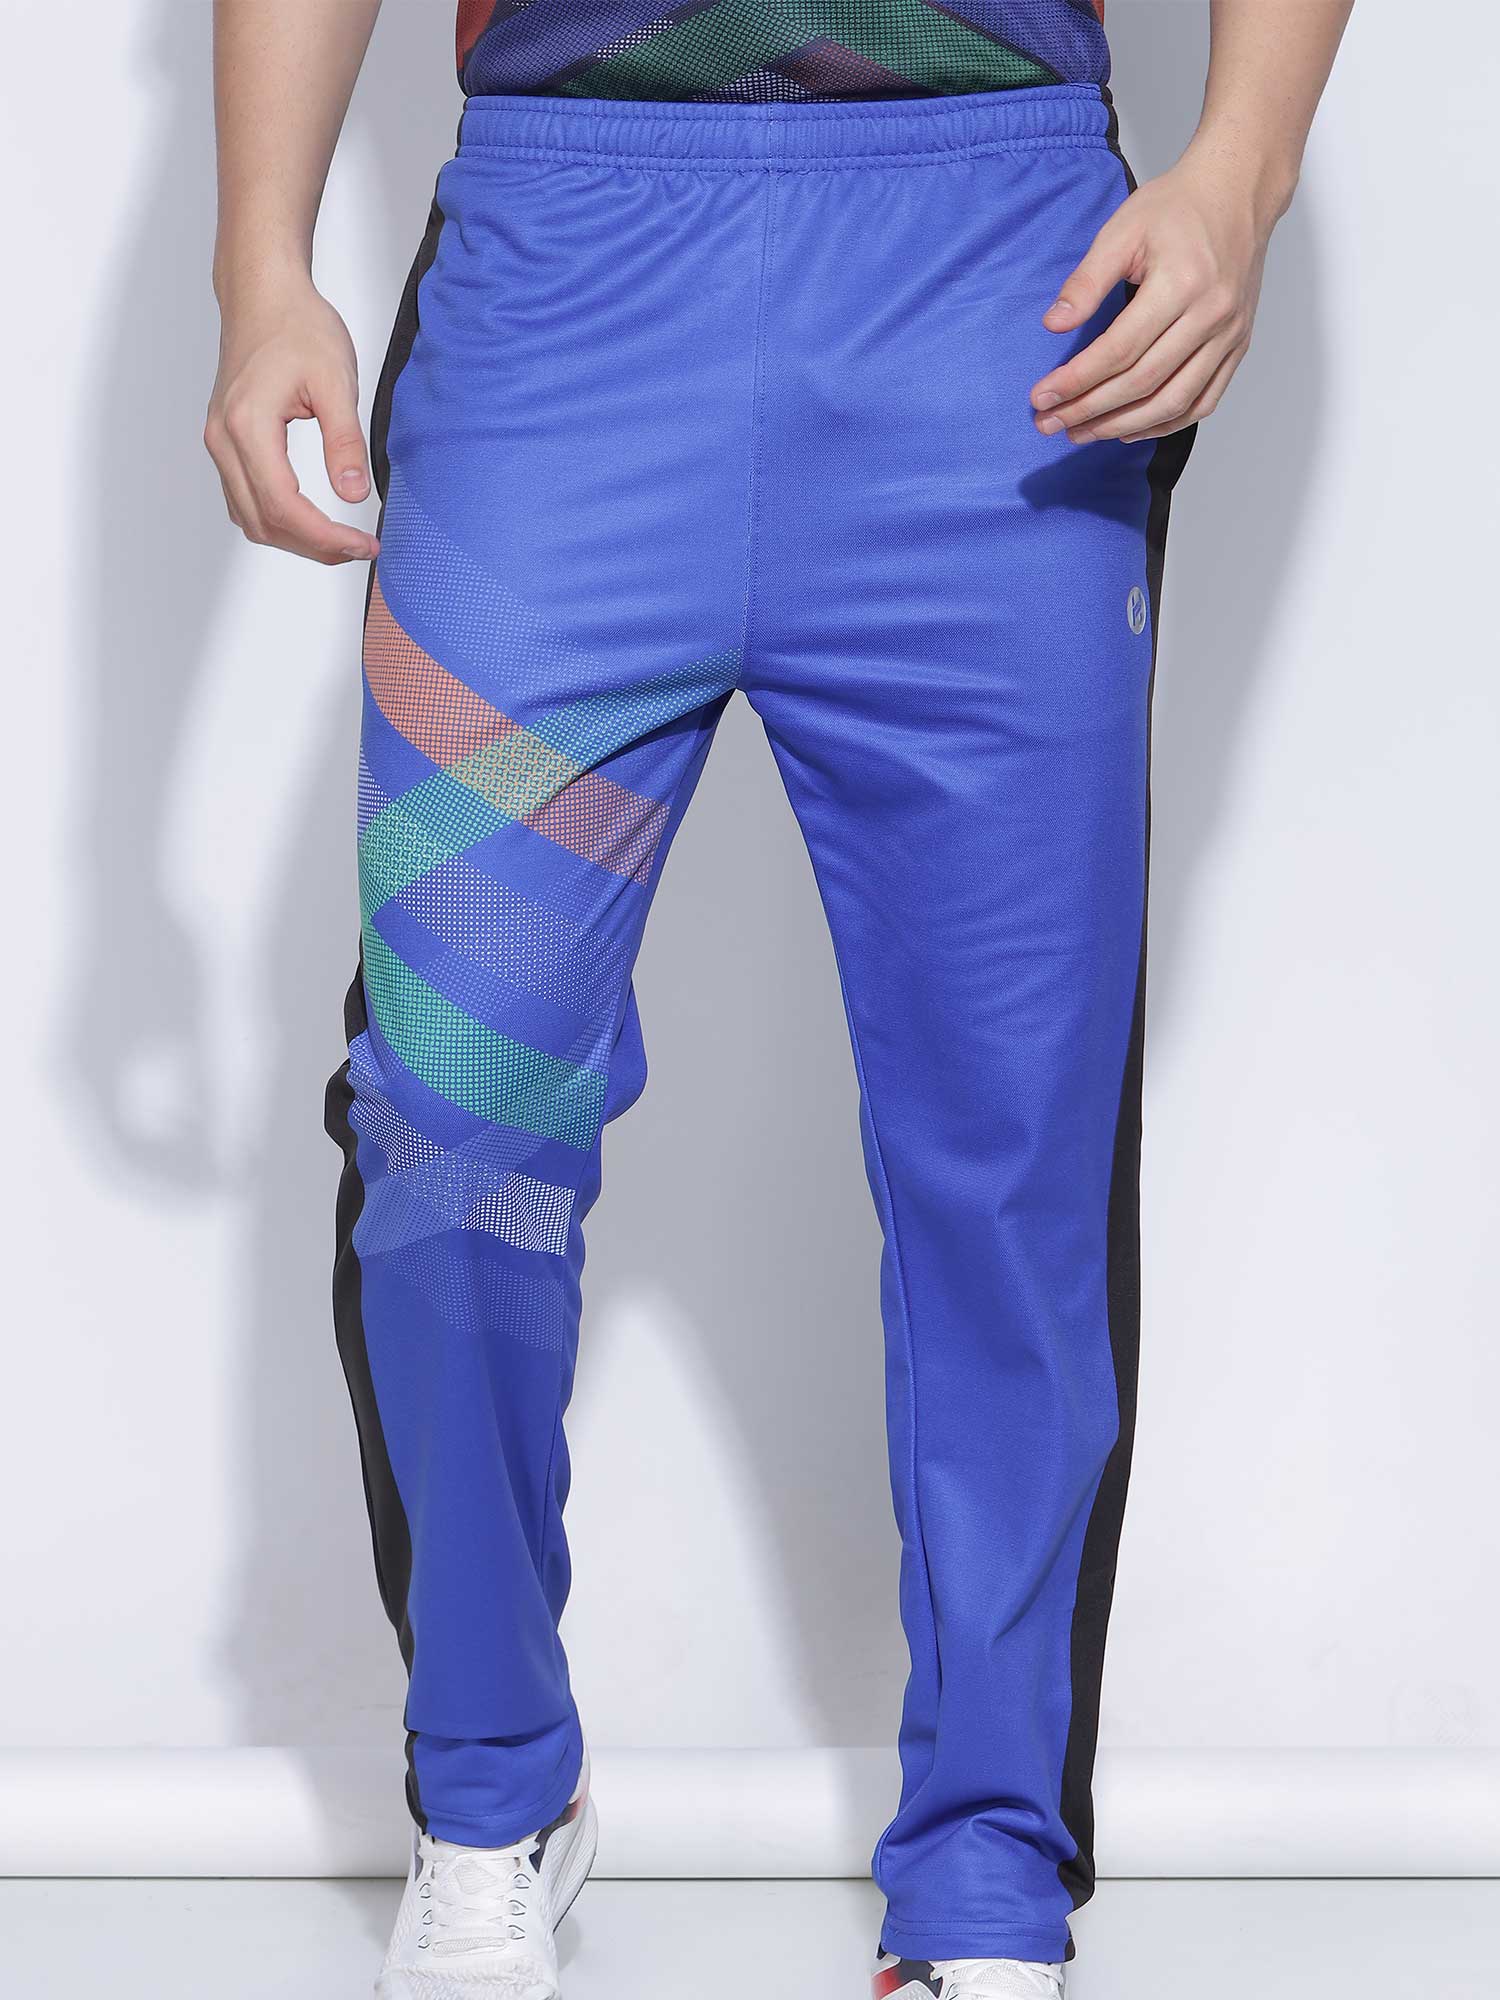 Cricket Pant in Surat - Dealers, Manufacturers & Suppliers - Justdial